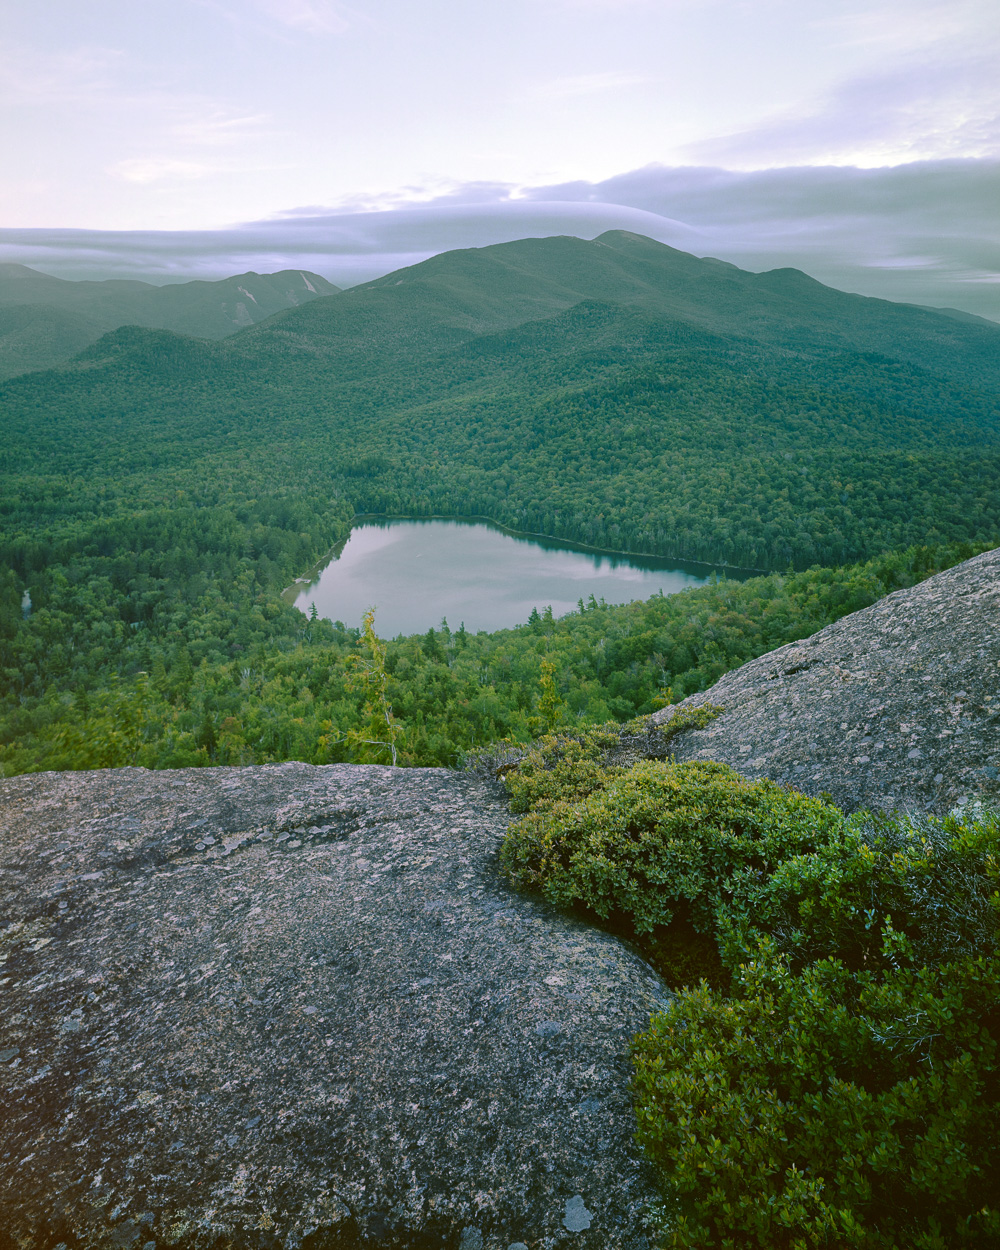  Algonquin and Heart Lake from Mount Jo, High Peaks Wilderness, NY. Portra 160, 4x5. 